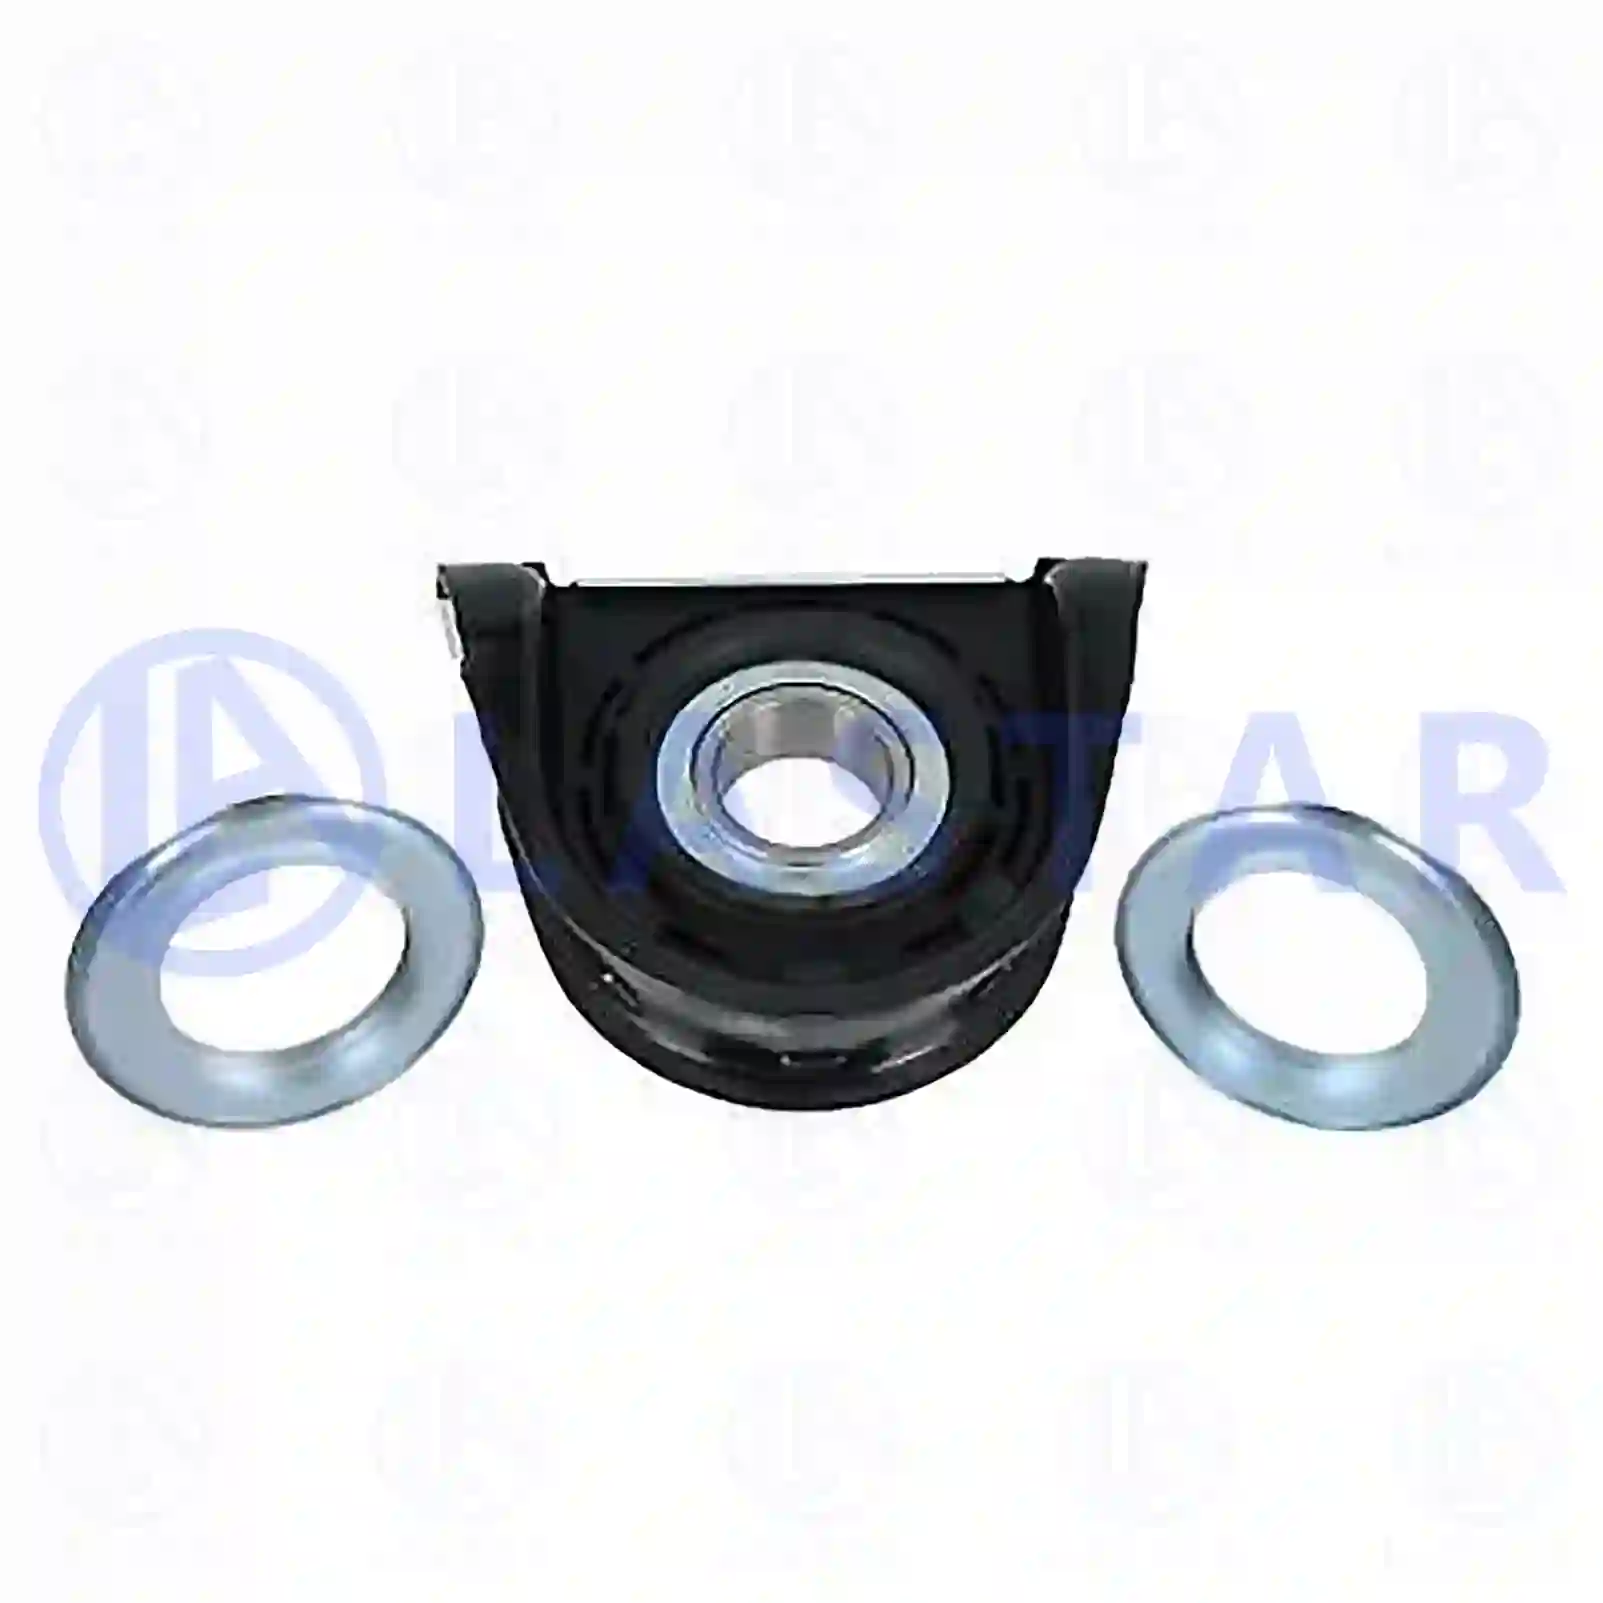 Center bearing, 77734327, 5001866236 ||  77734327 Lastar Spare Part | Truck Spare Parts, Auotomotive Spare Parts Center bearing, 77734327, 5001866236 ||  77734327 Lastar Spare Part | Truck Spare Parts, Auotomotive Spare Parts